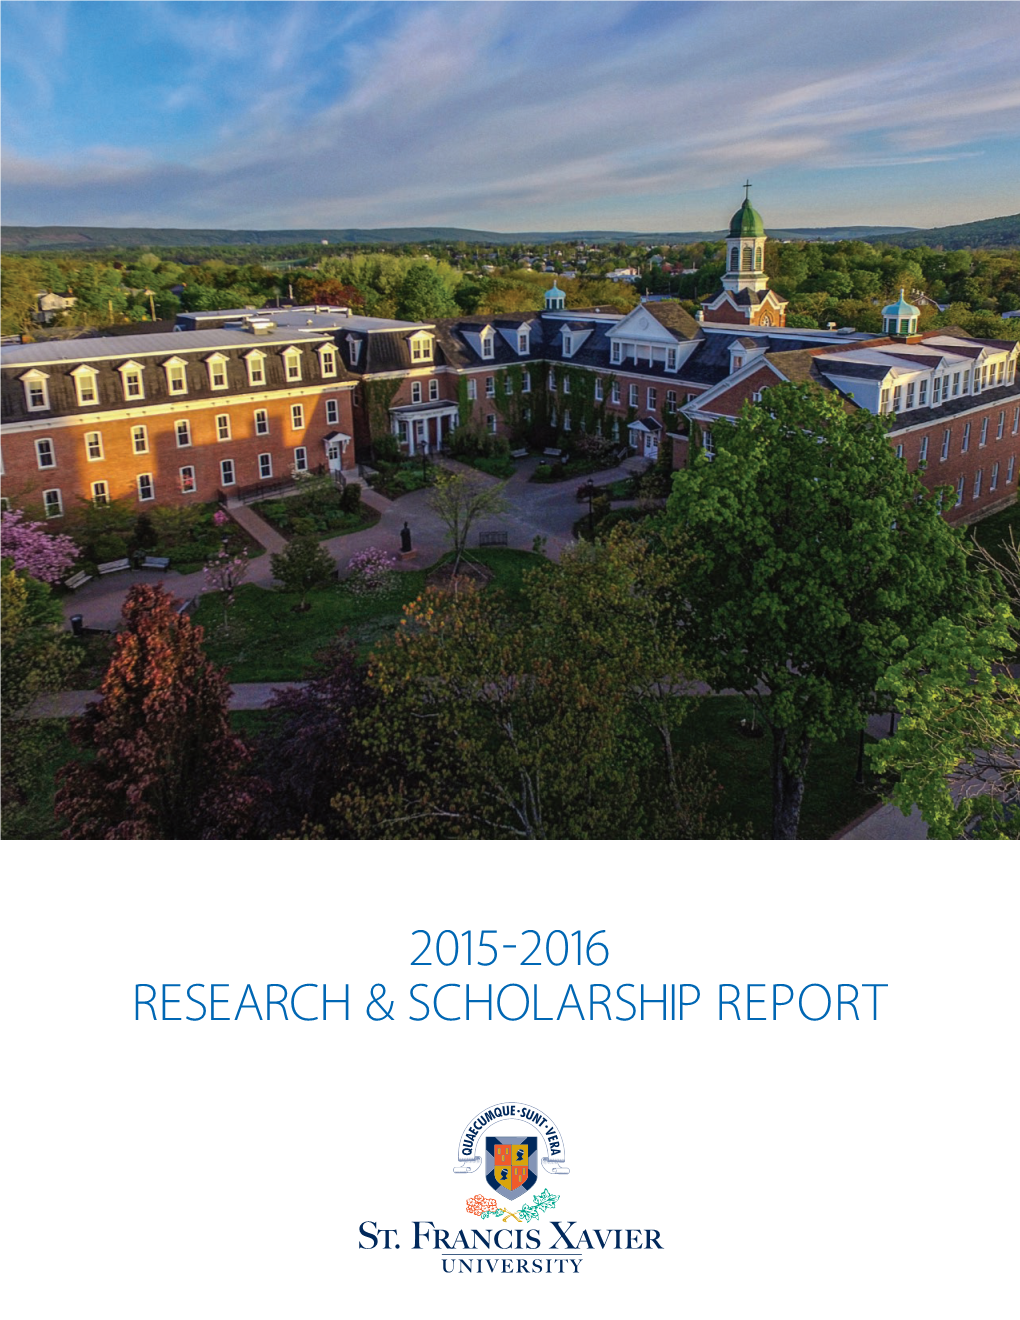 2015-2016 Research & Scholarship Report